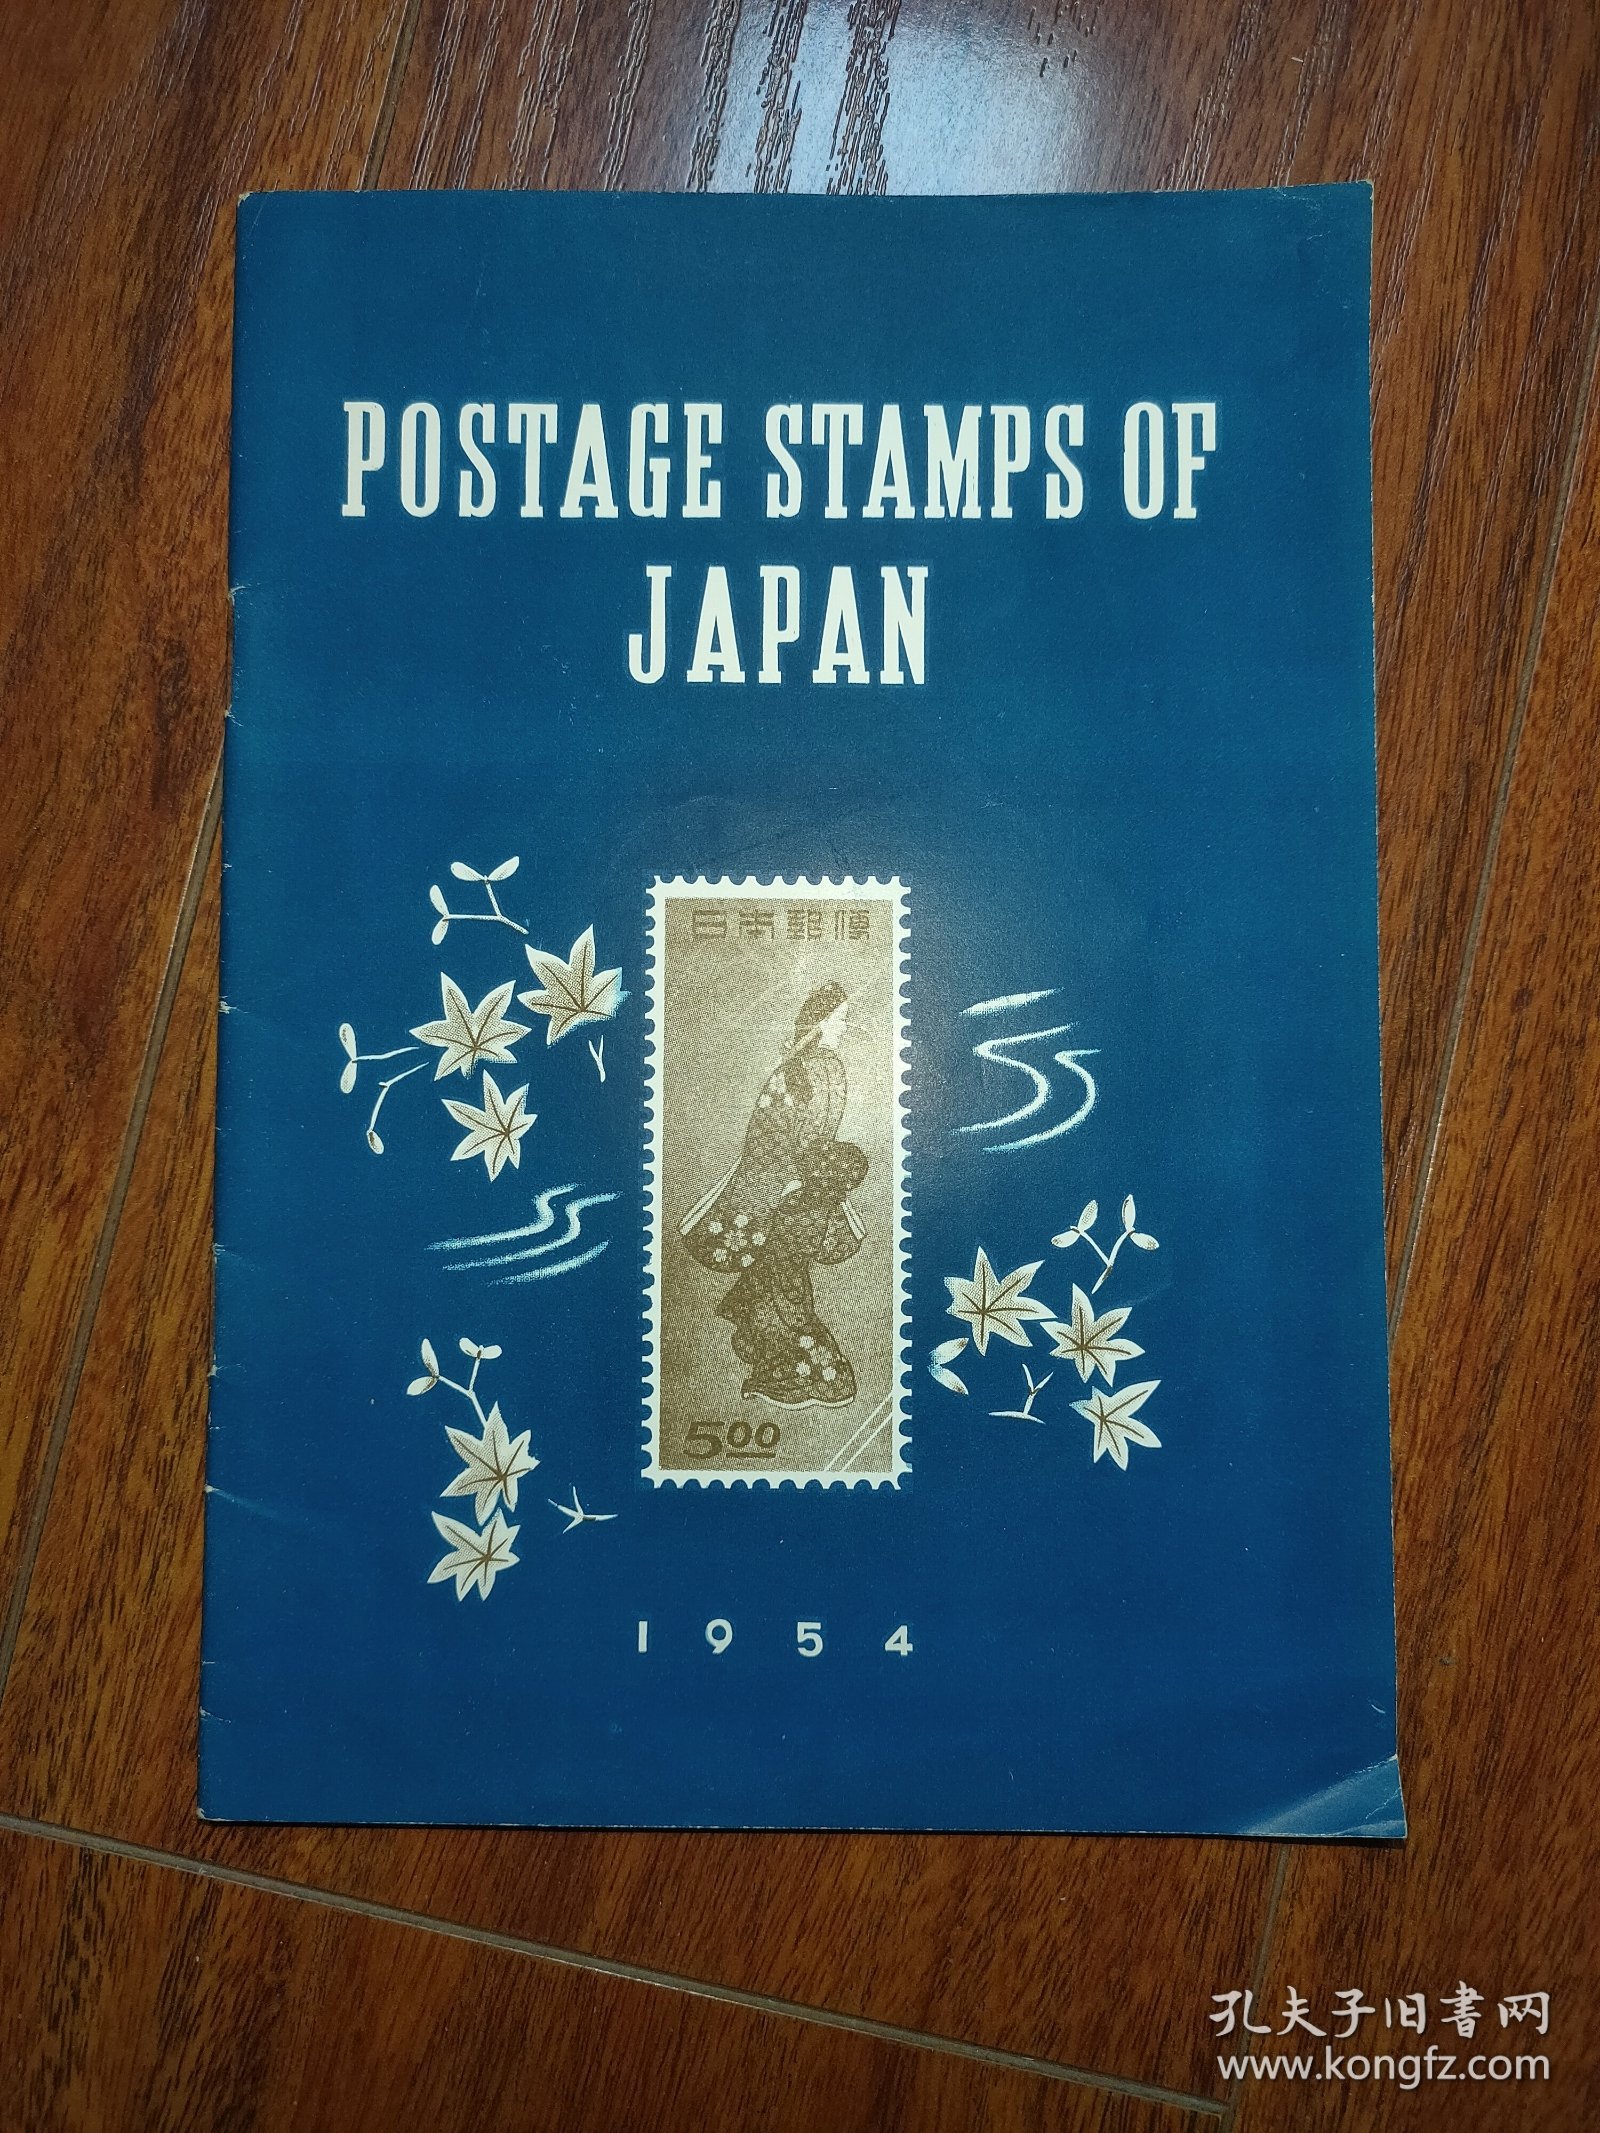 POSTAGE STAMPS OF JAPAN